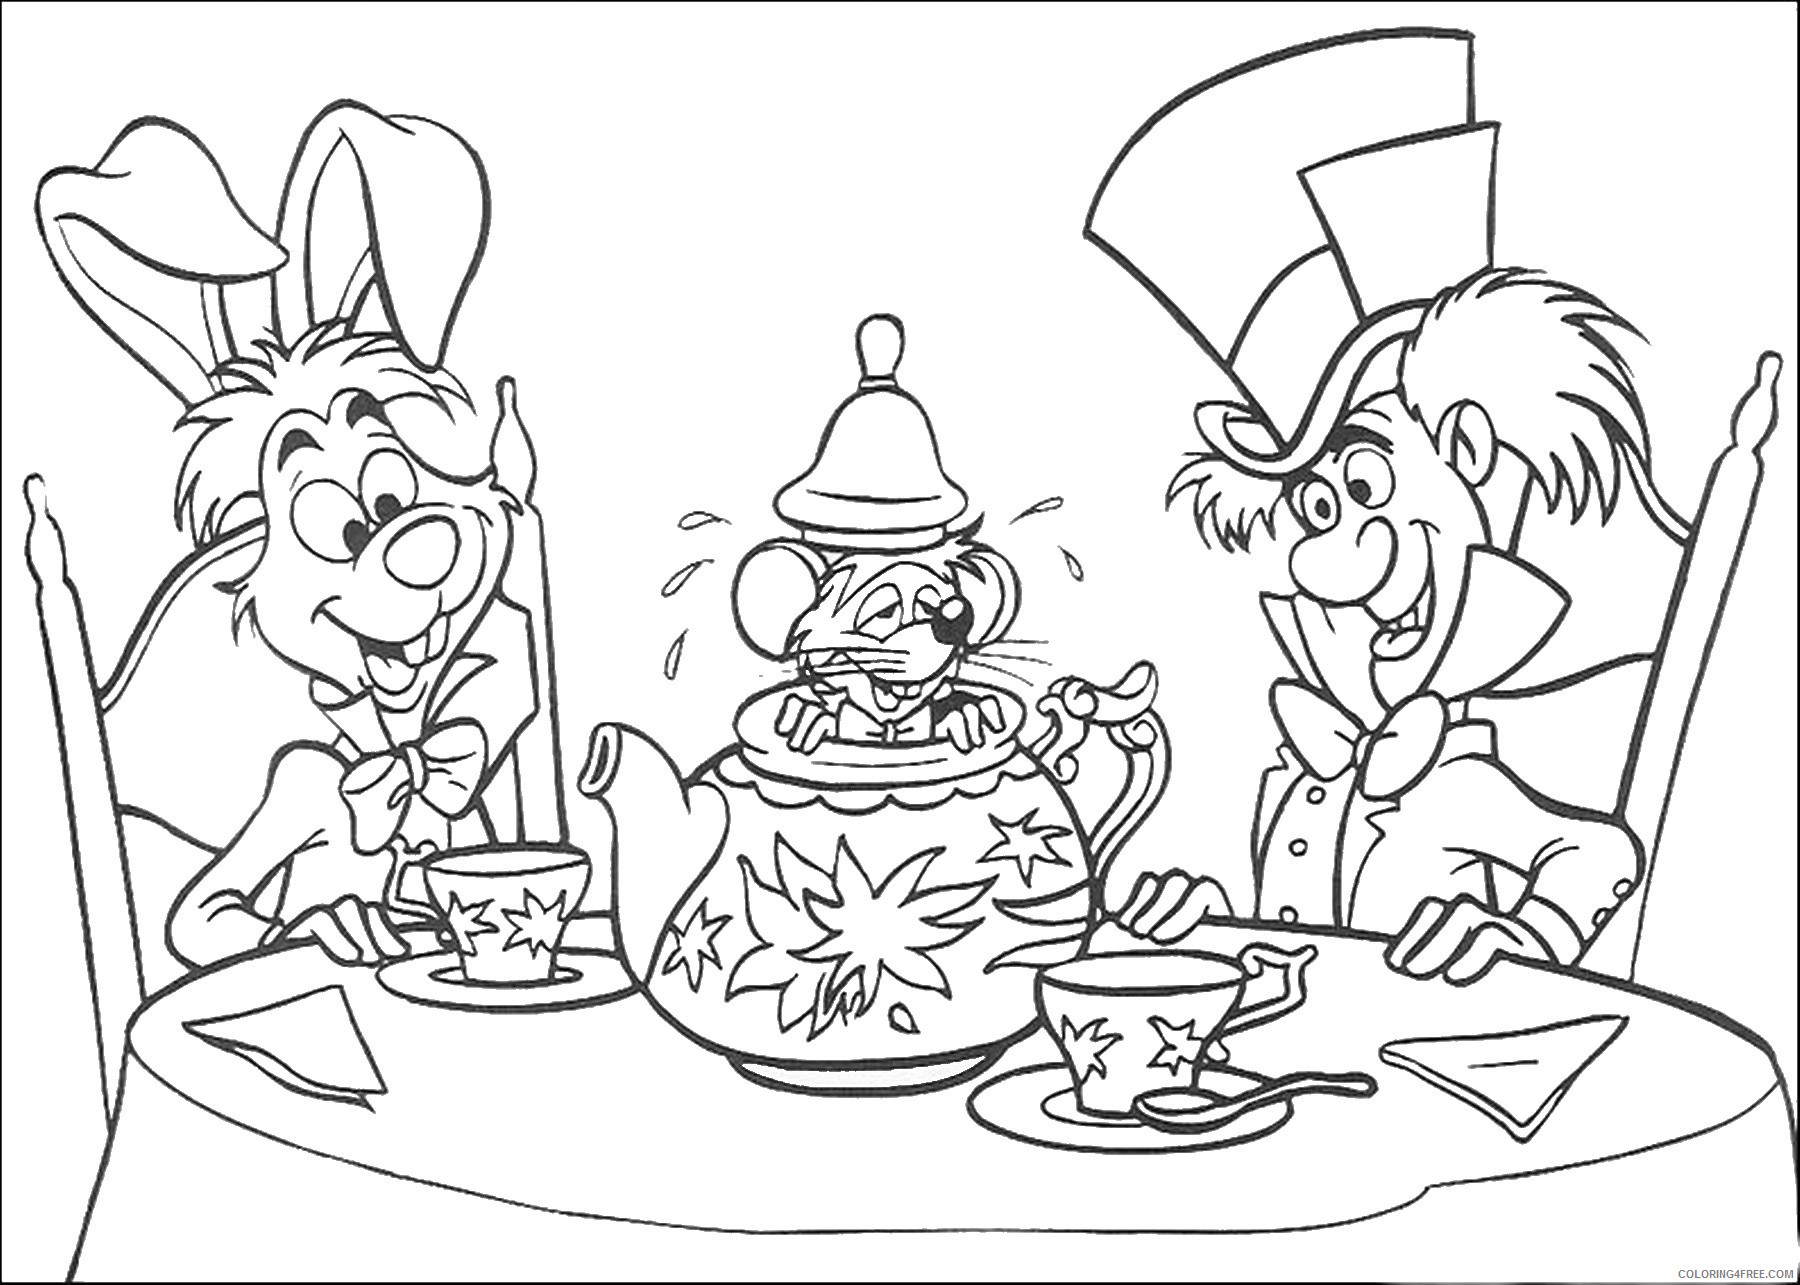 Alice in Wonderland Coloring Pages Cartoons alice_13 Printable 2020 0353 Coloring4free